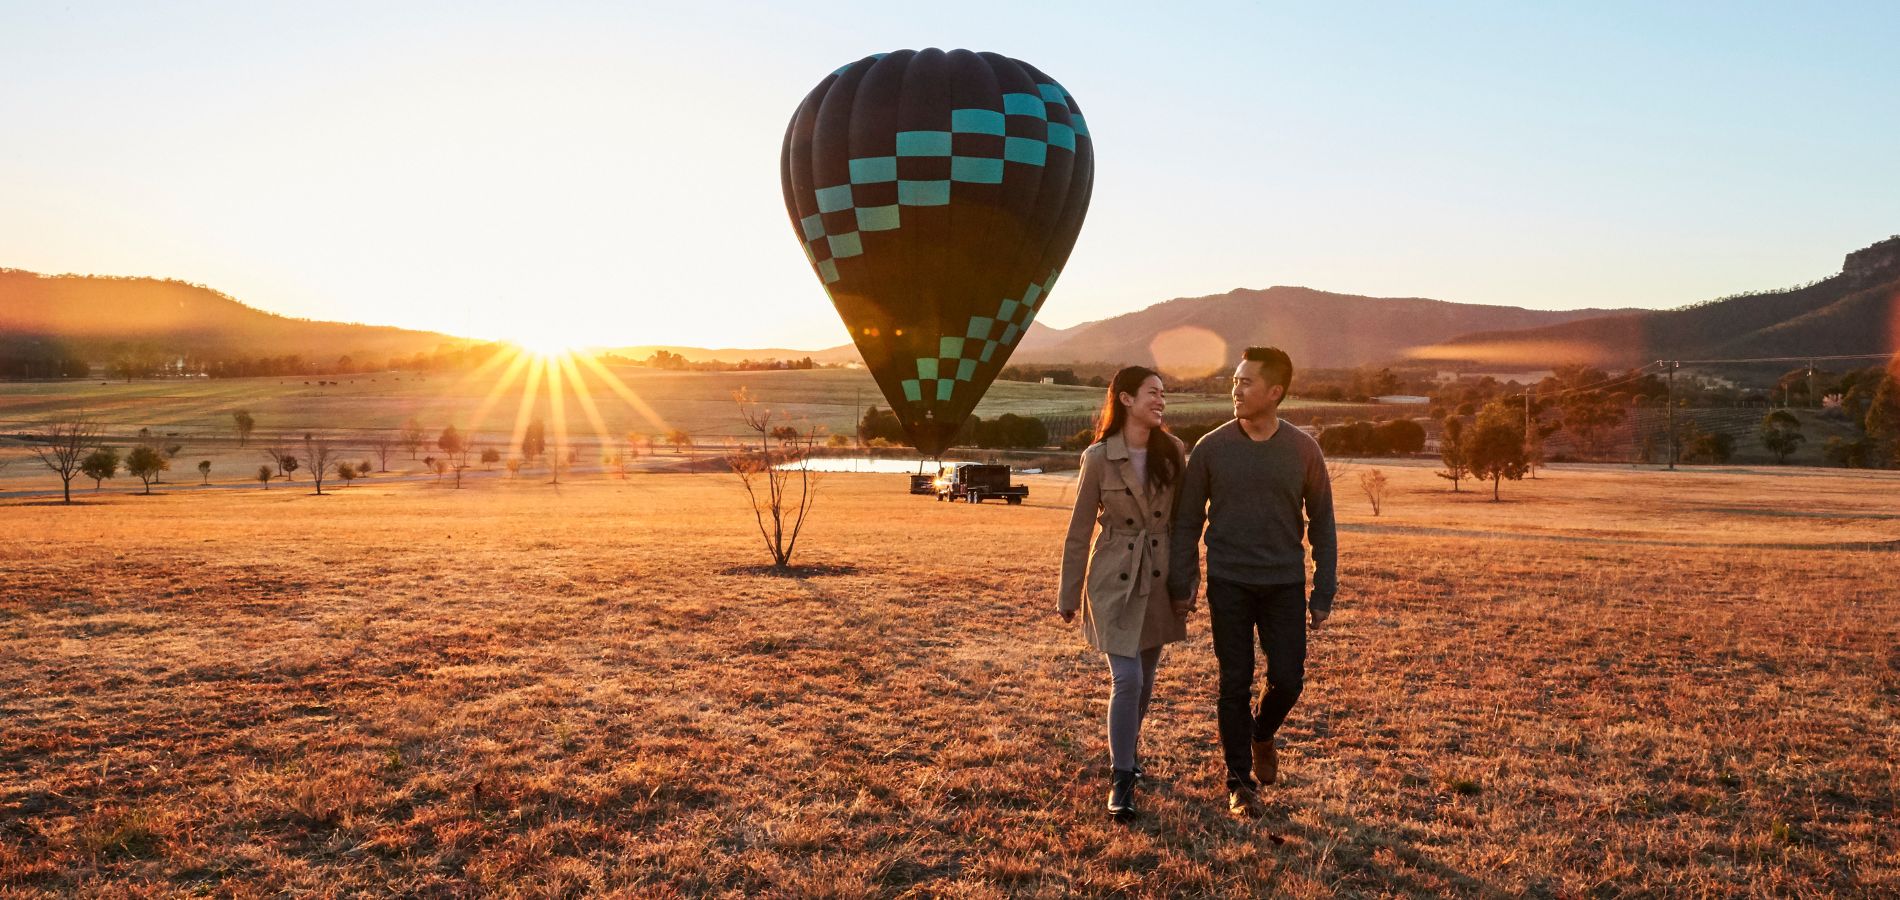 This is an image of Hot Air Ballooning in the Hunter Valley